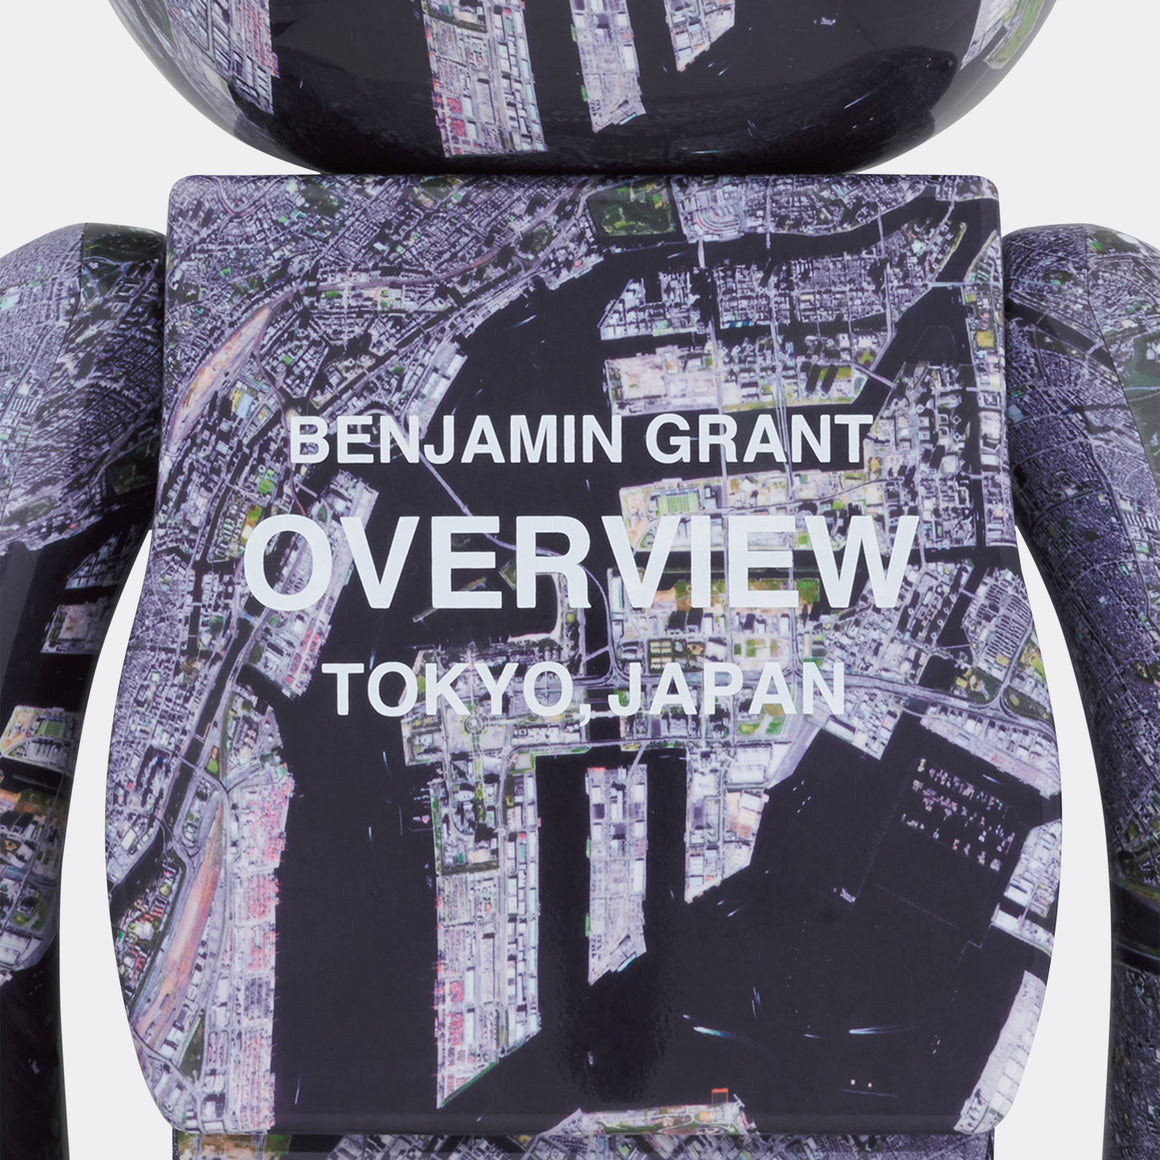 Medicom Toy - Be@rbrick x Benjamin Grant 1000% - Overview Tokyo - UP THERE